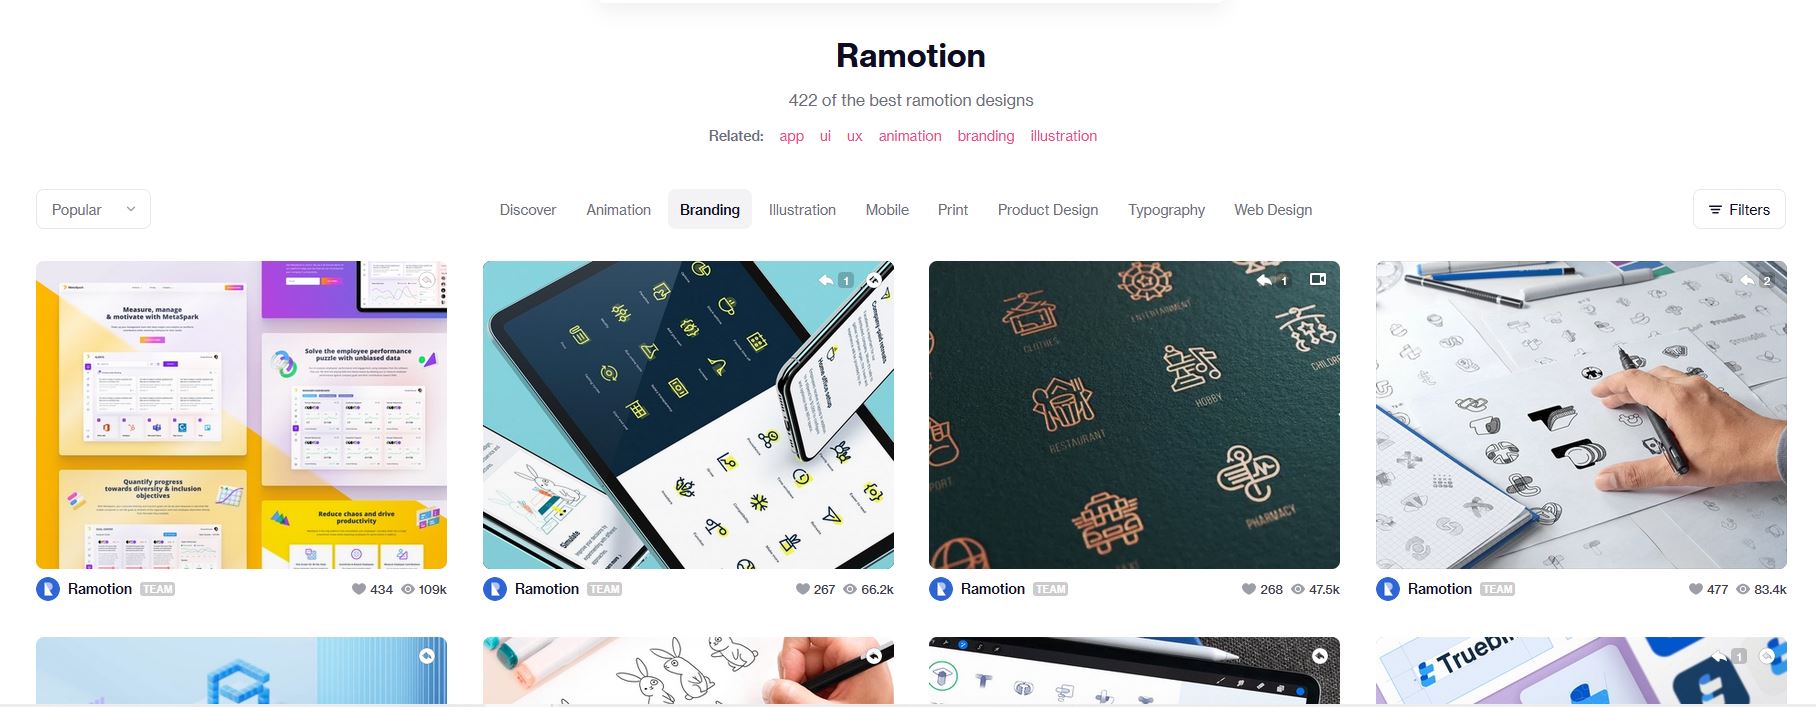 A gallery of branding projects done by Ramotion